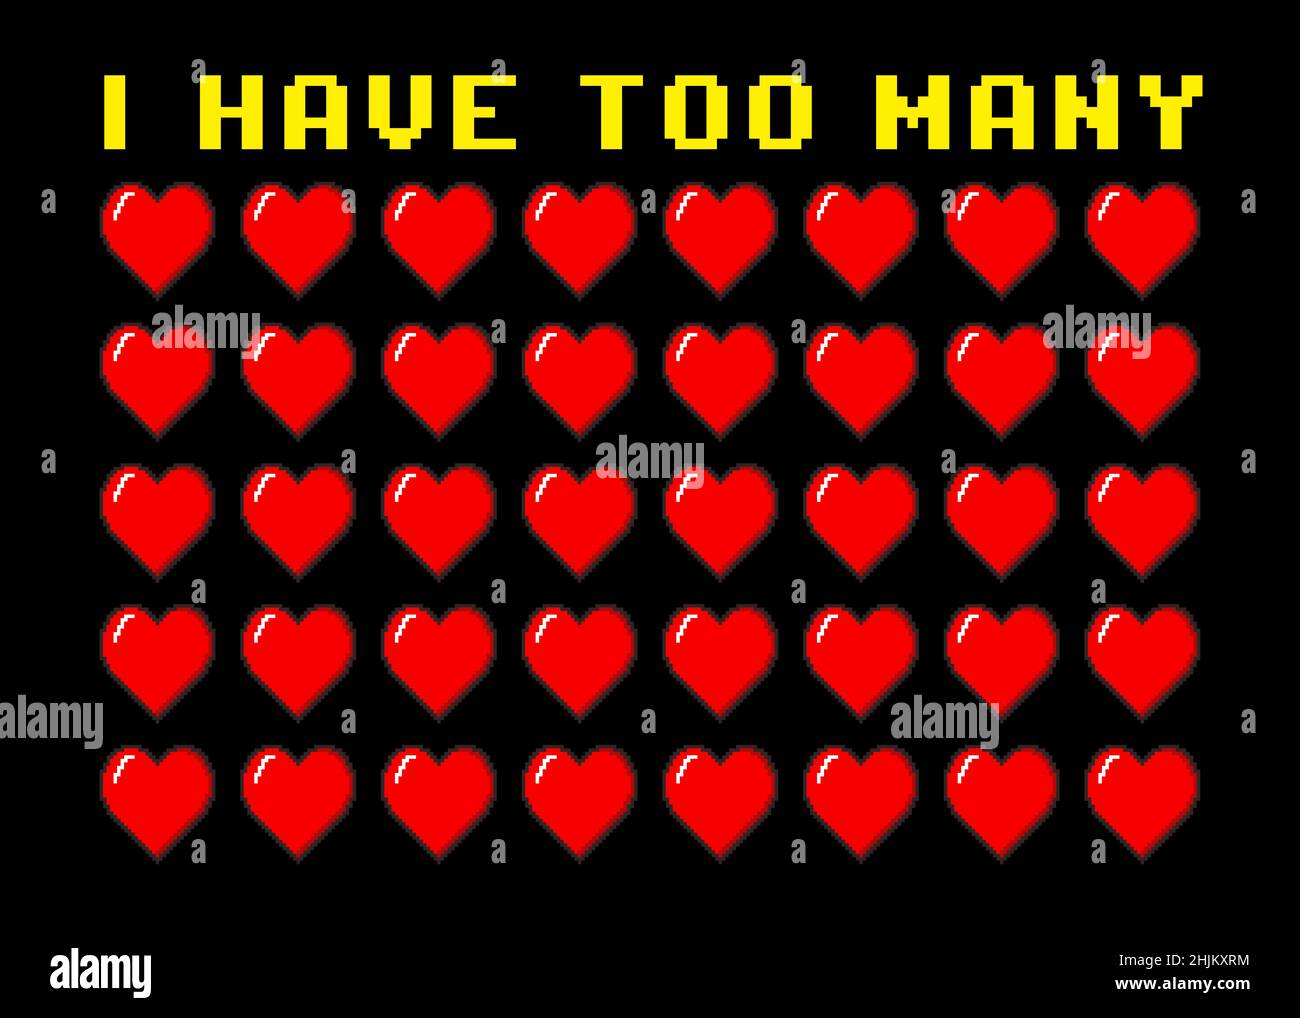 A funny retro poster, pixel art 8-bit style: a lot of red heart shapes with the text I have too many hearts. Stock Photo